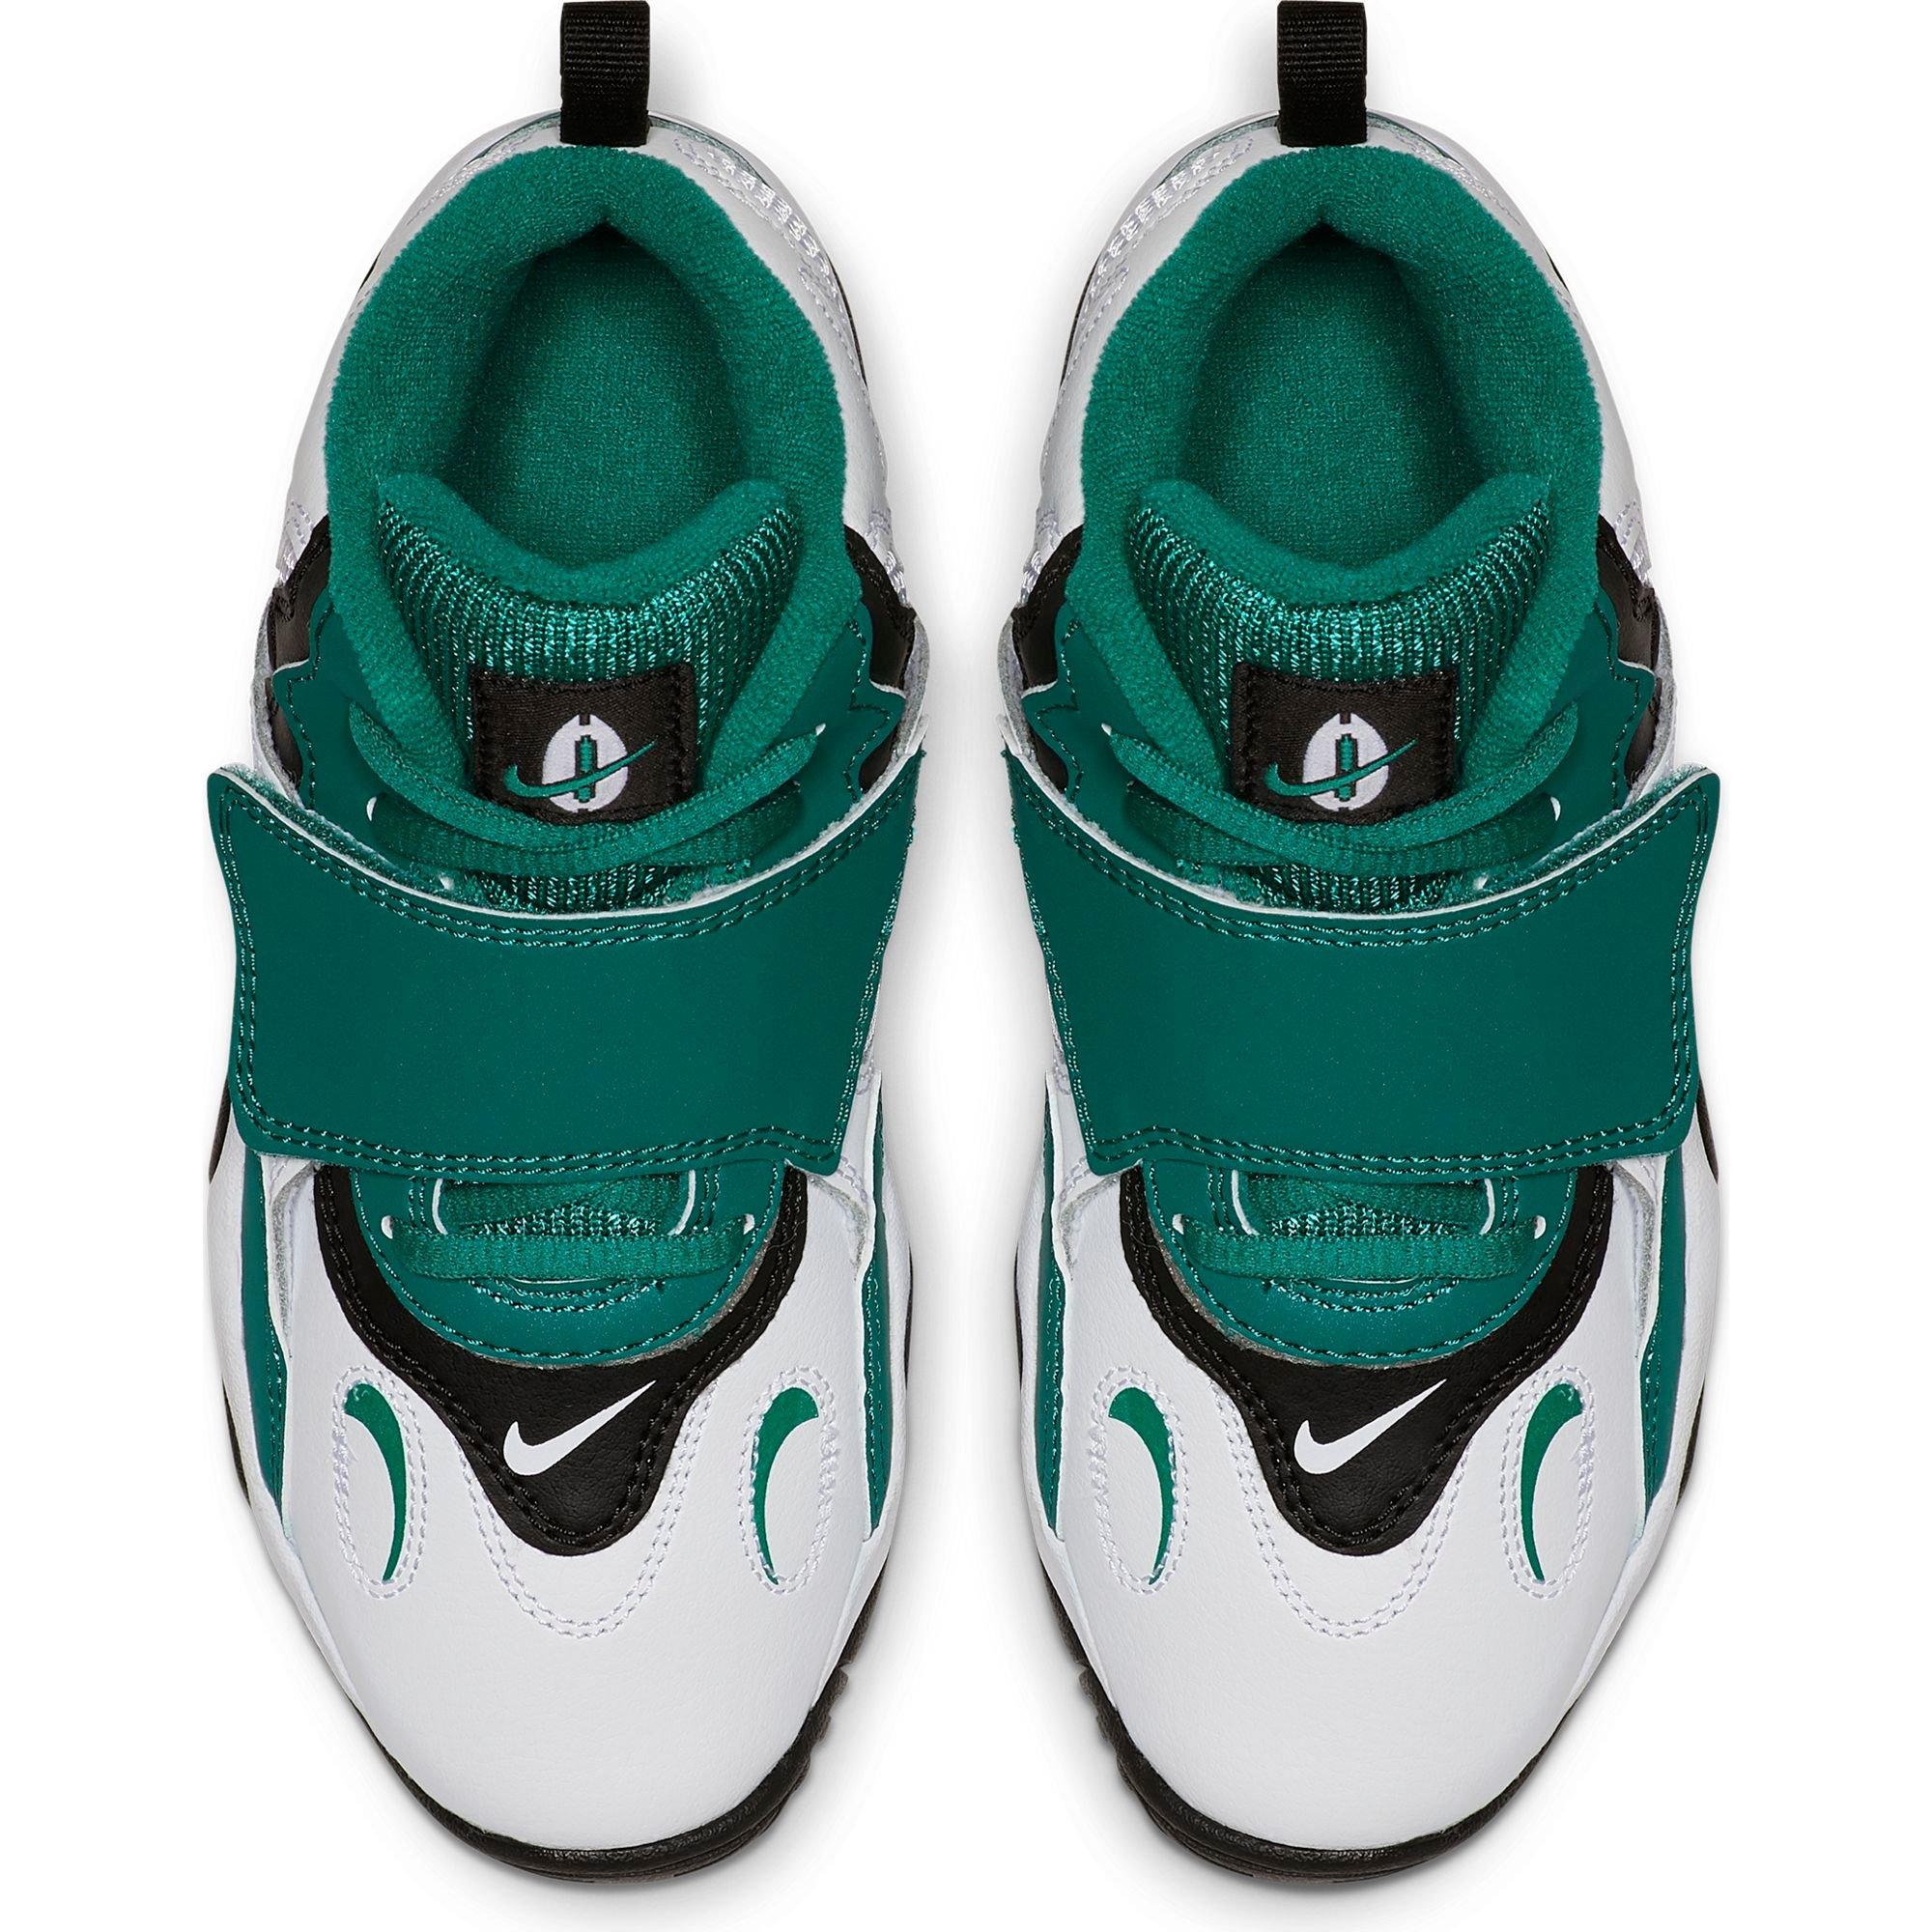 teal turf shoes